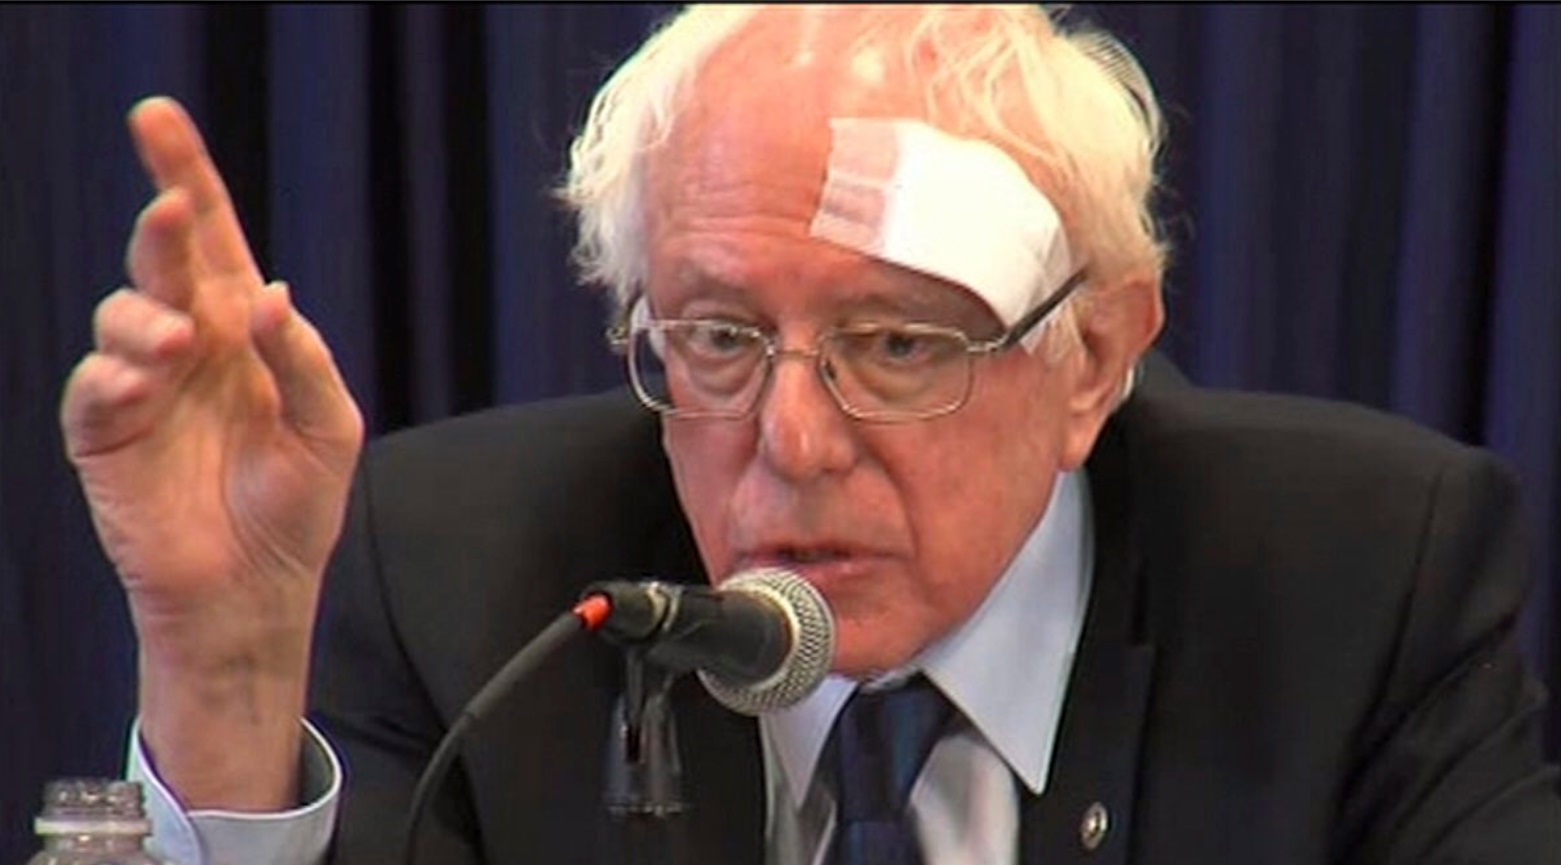 PHOTO Bernie Sanders With Giant Bandaid On His Forehead During Speech